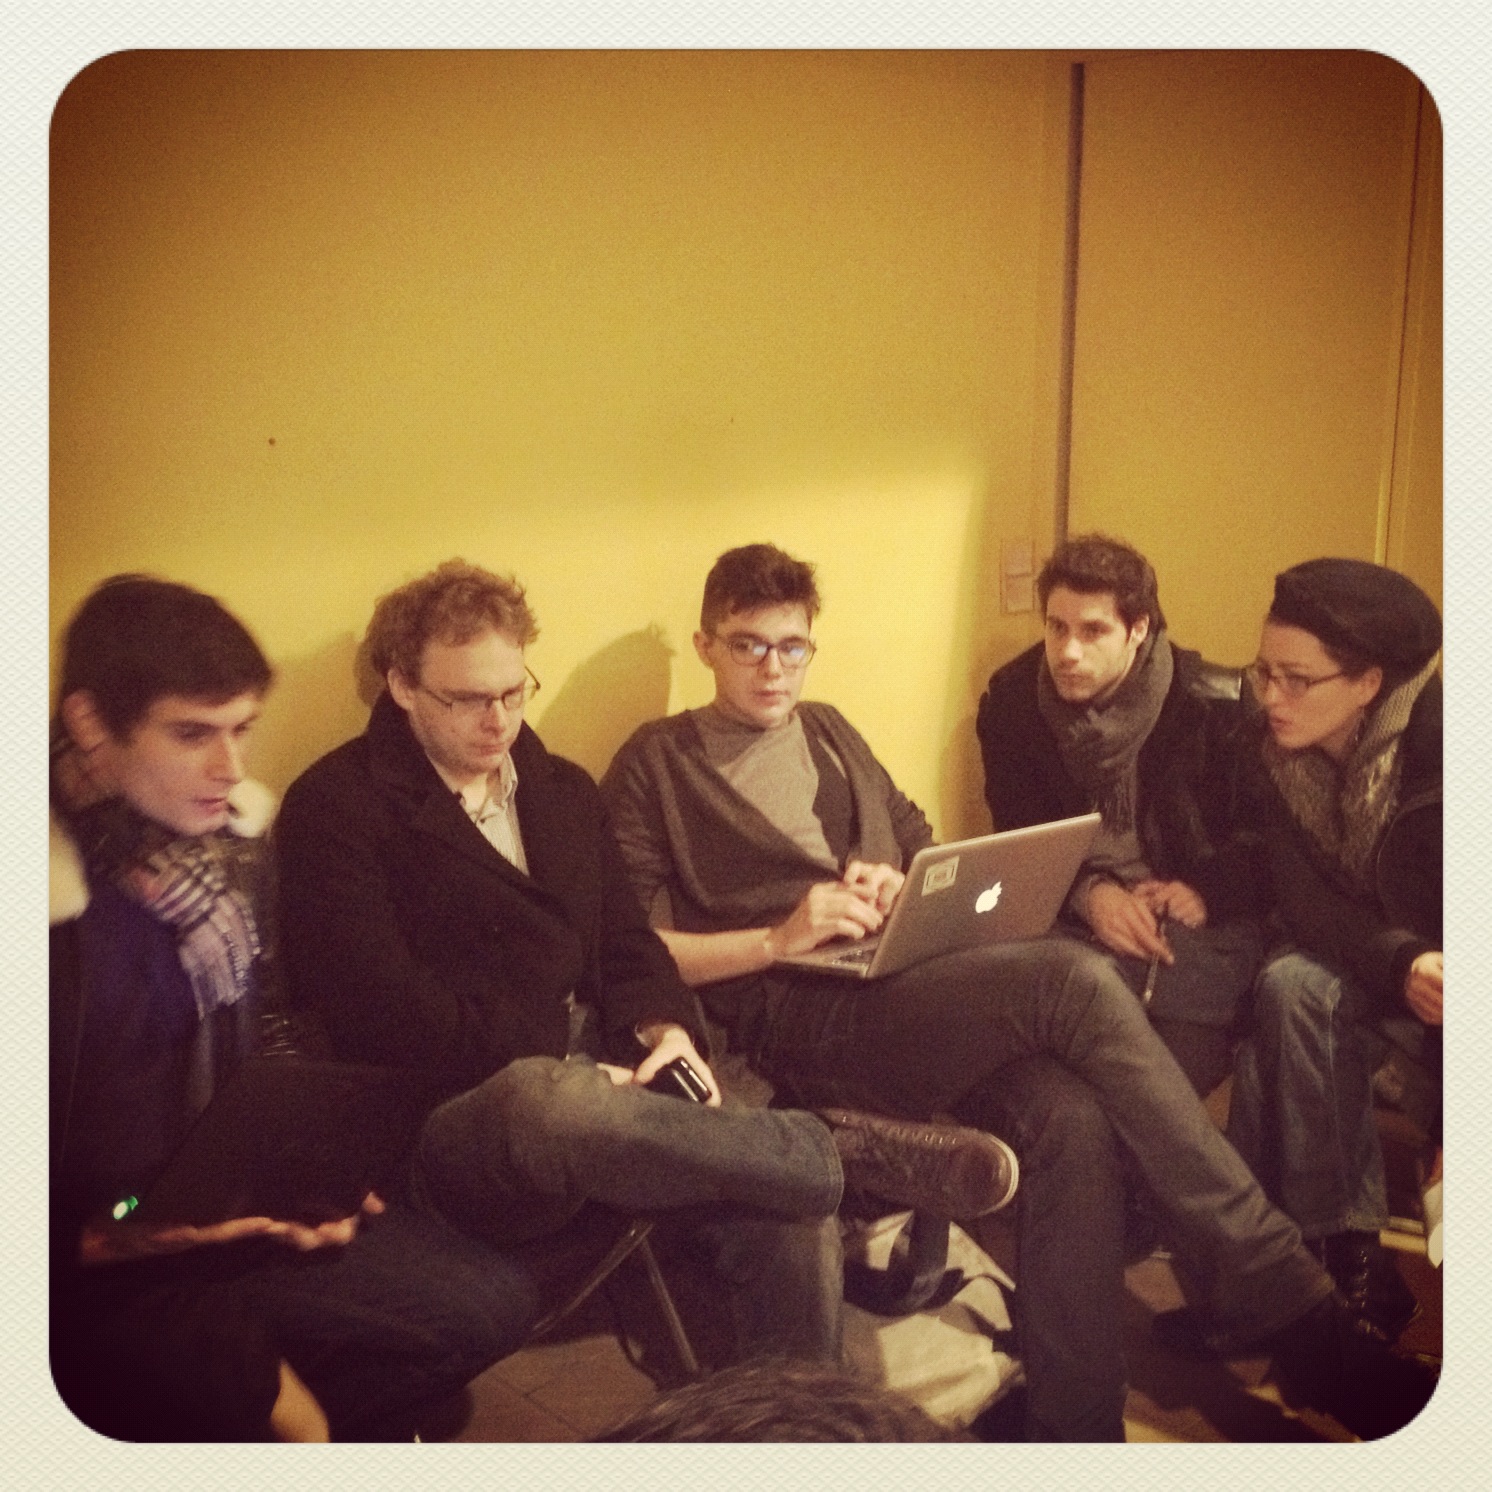 several men sitting together with a laptop